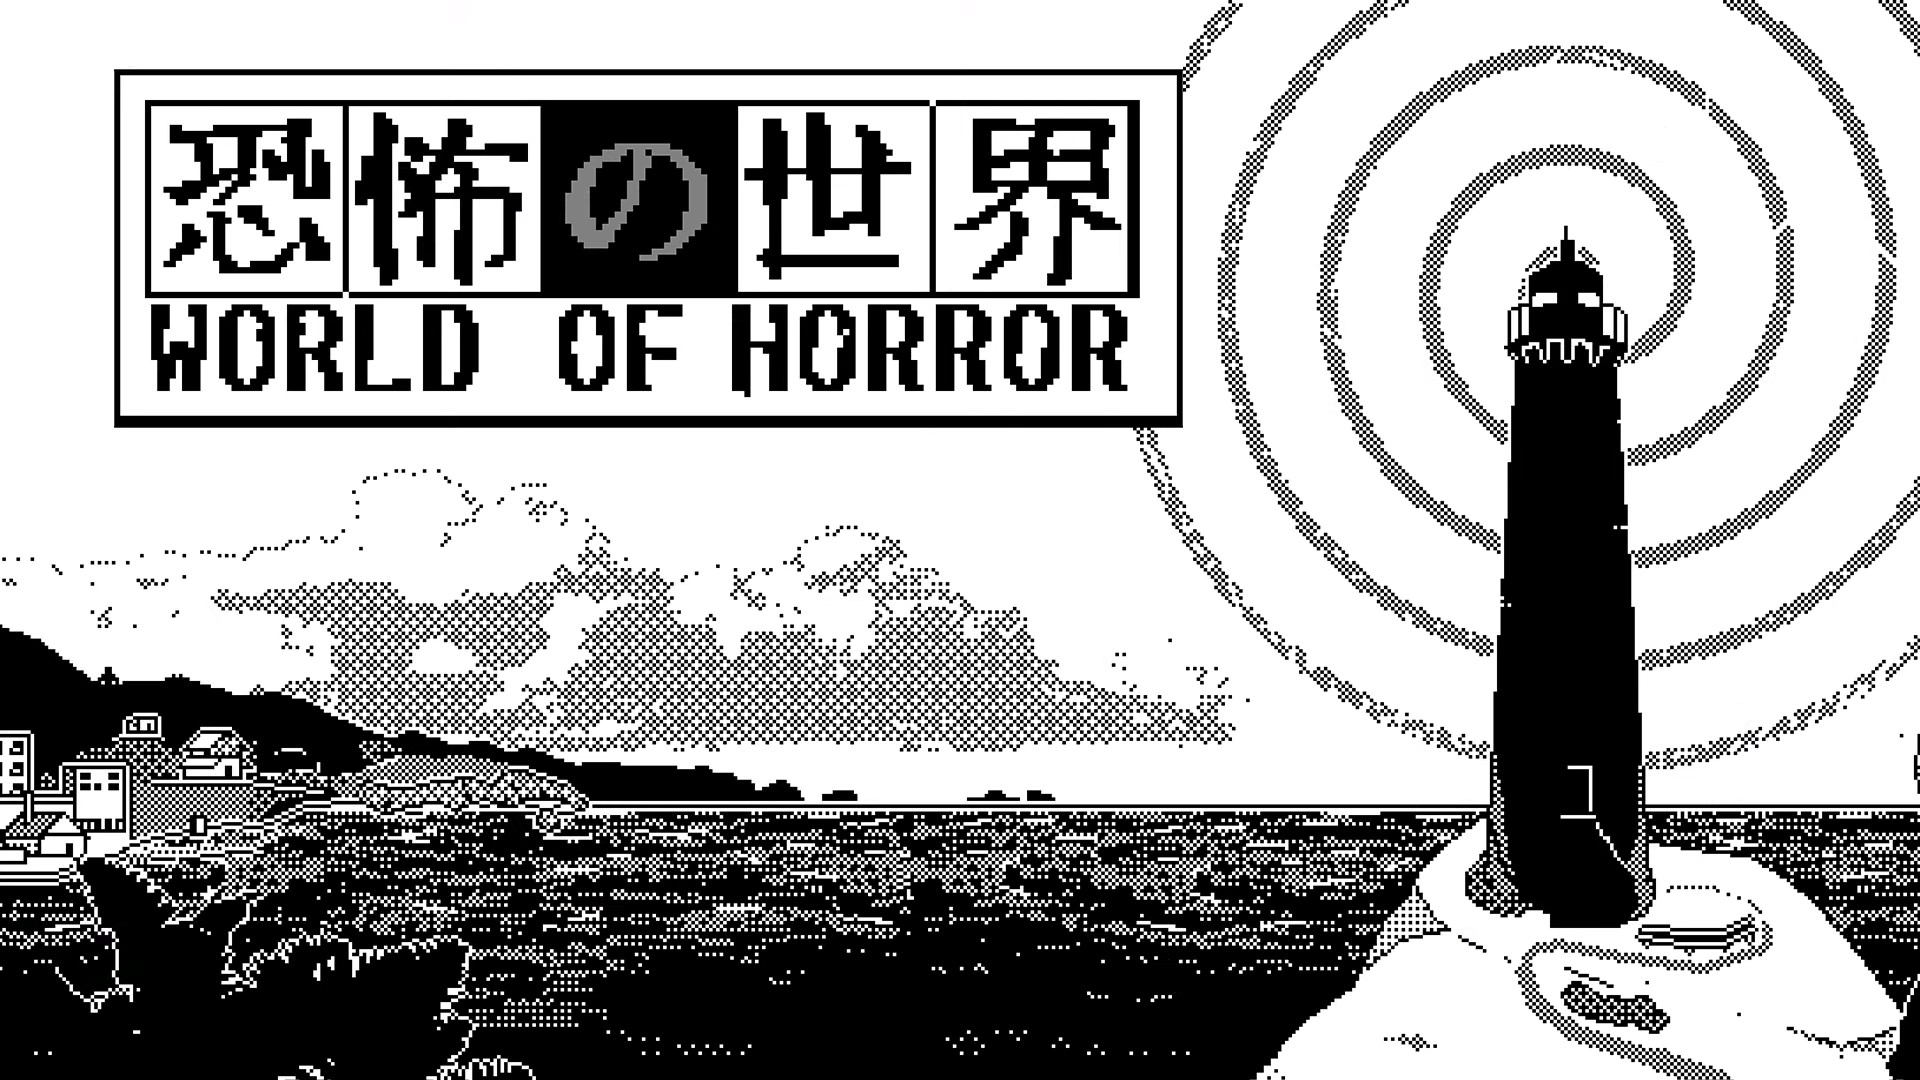 World of Horror Nintendo Switch & PlayStation Release Delayed - XPCorner